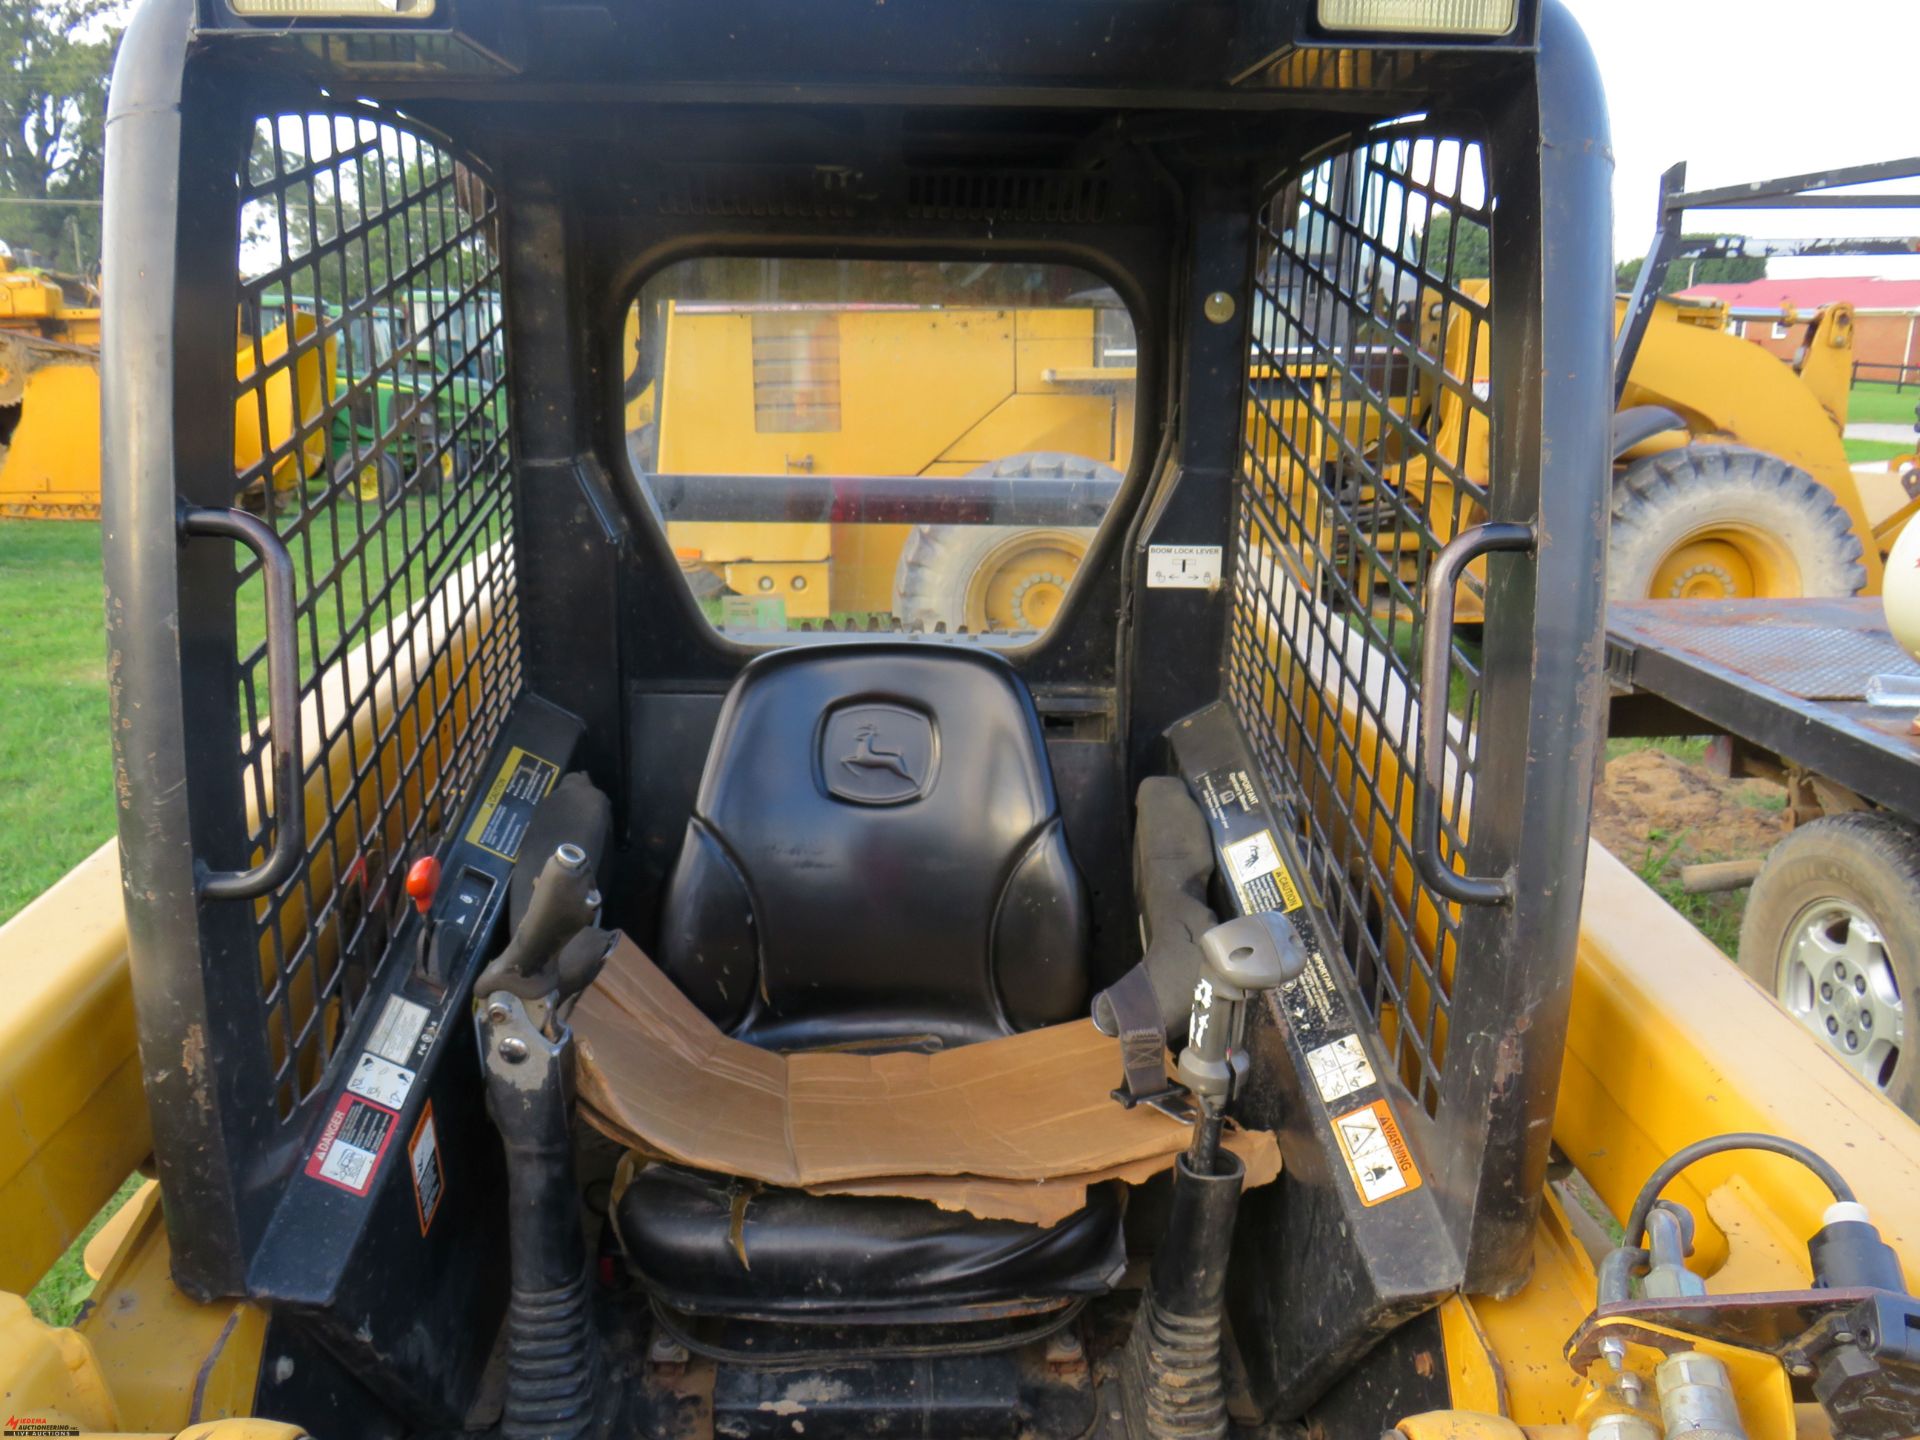 JOHN DEERE 317 RUBBER TIRE SKID STEER, AUXILIARY HYDRAULICS, 12-16.5 TIRES, REAR WEIGHTS, 2972 HOURS - Image 5 of 6